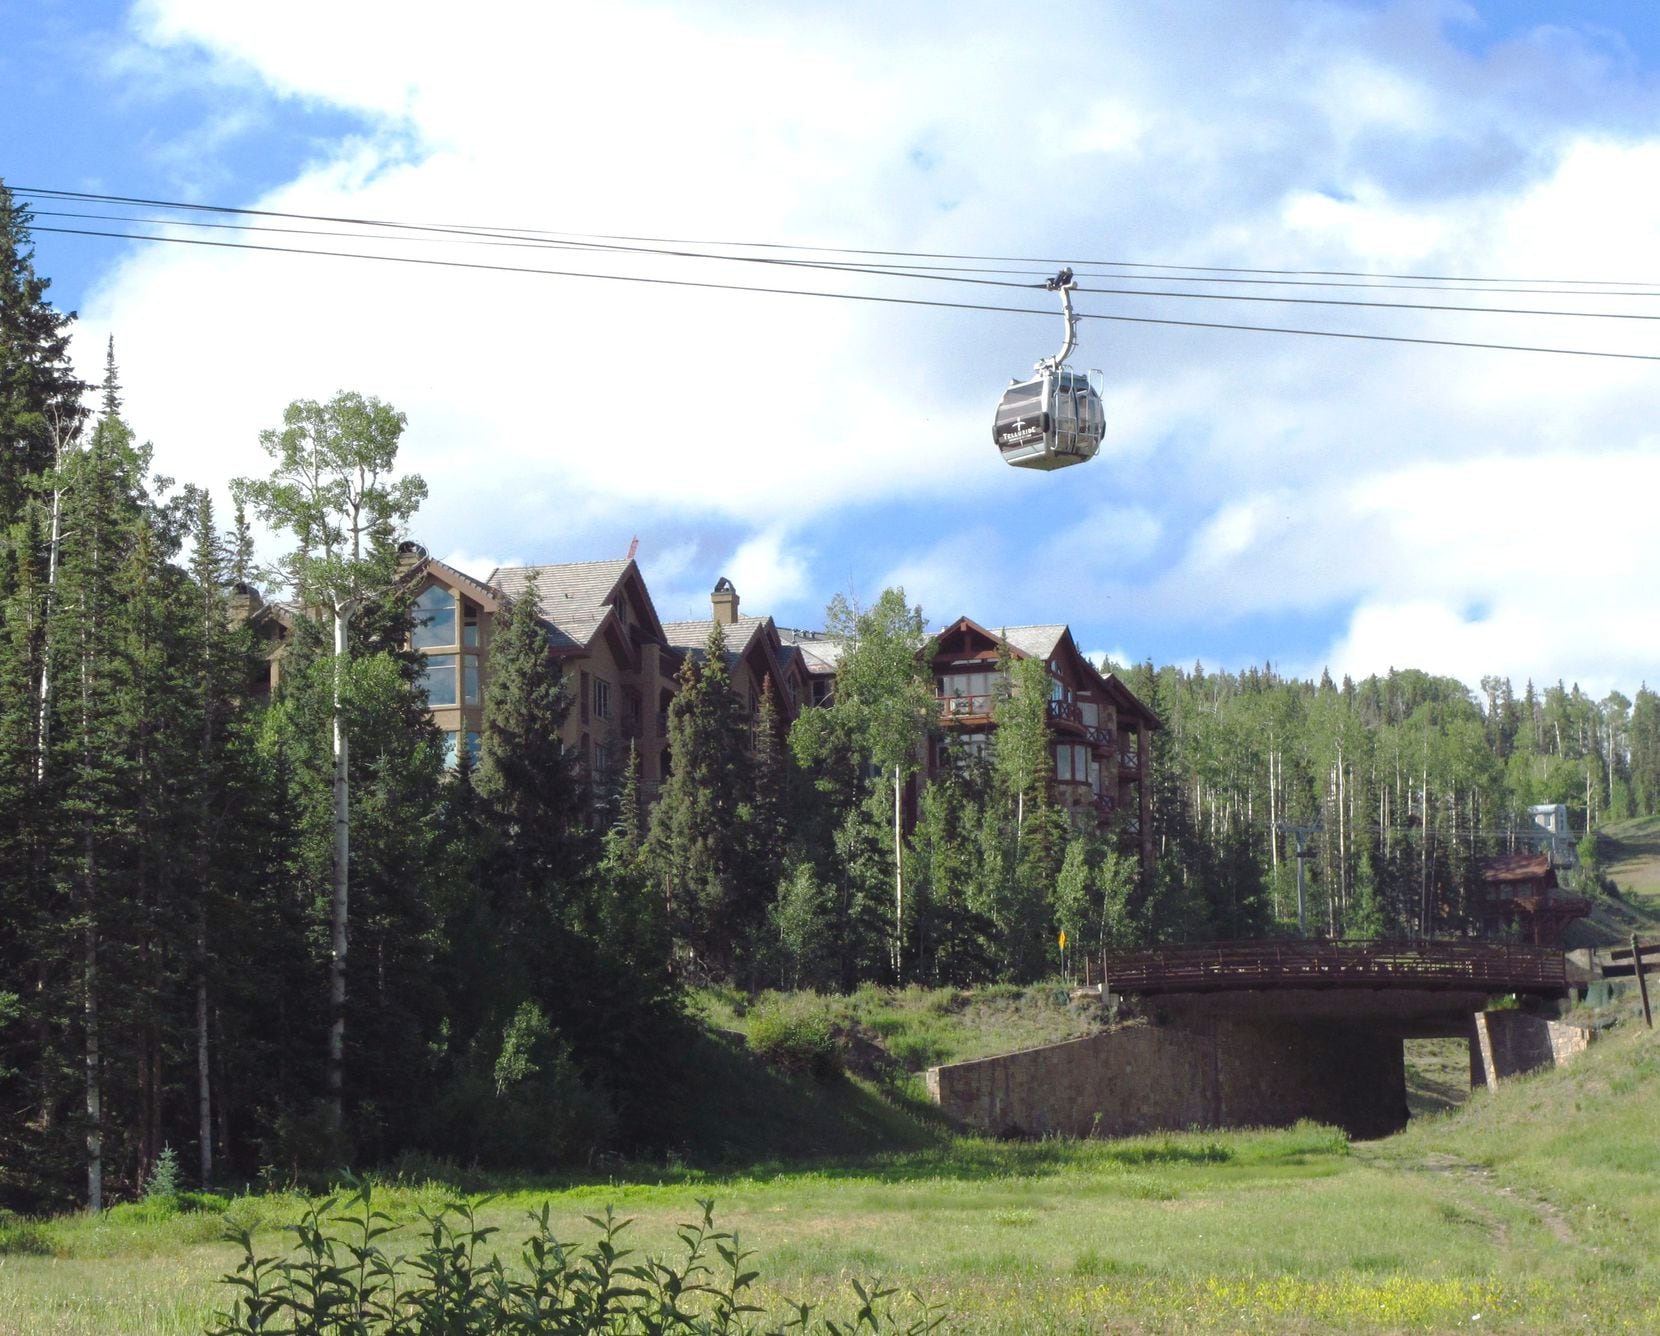 An innovative gondola system provides continuous free transportation between Telluride and Mountain Village.